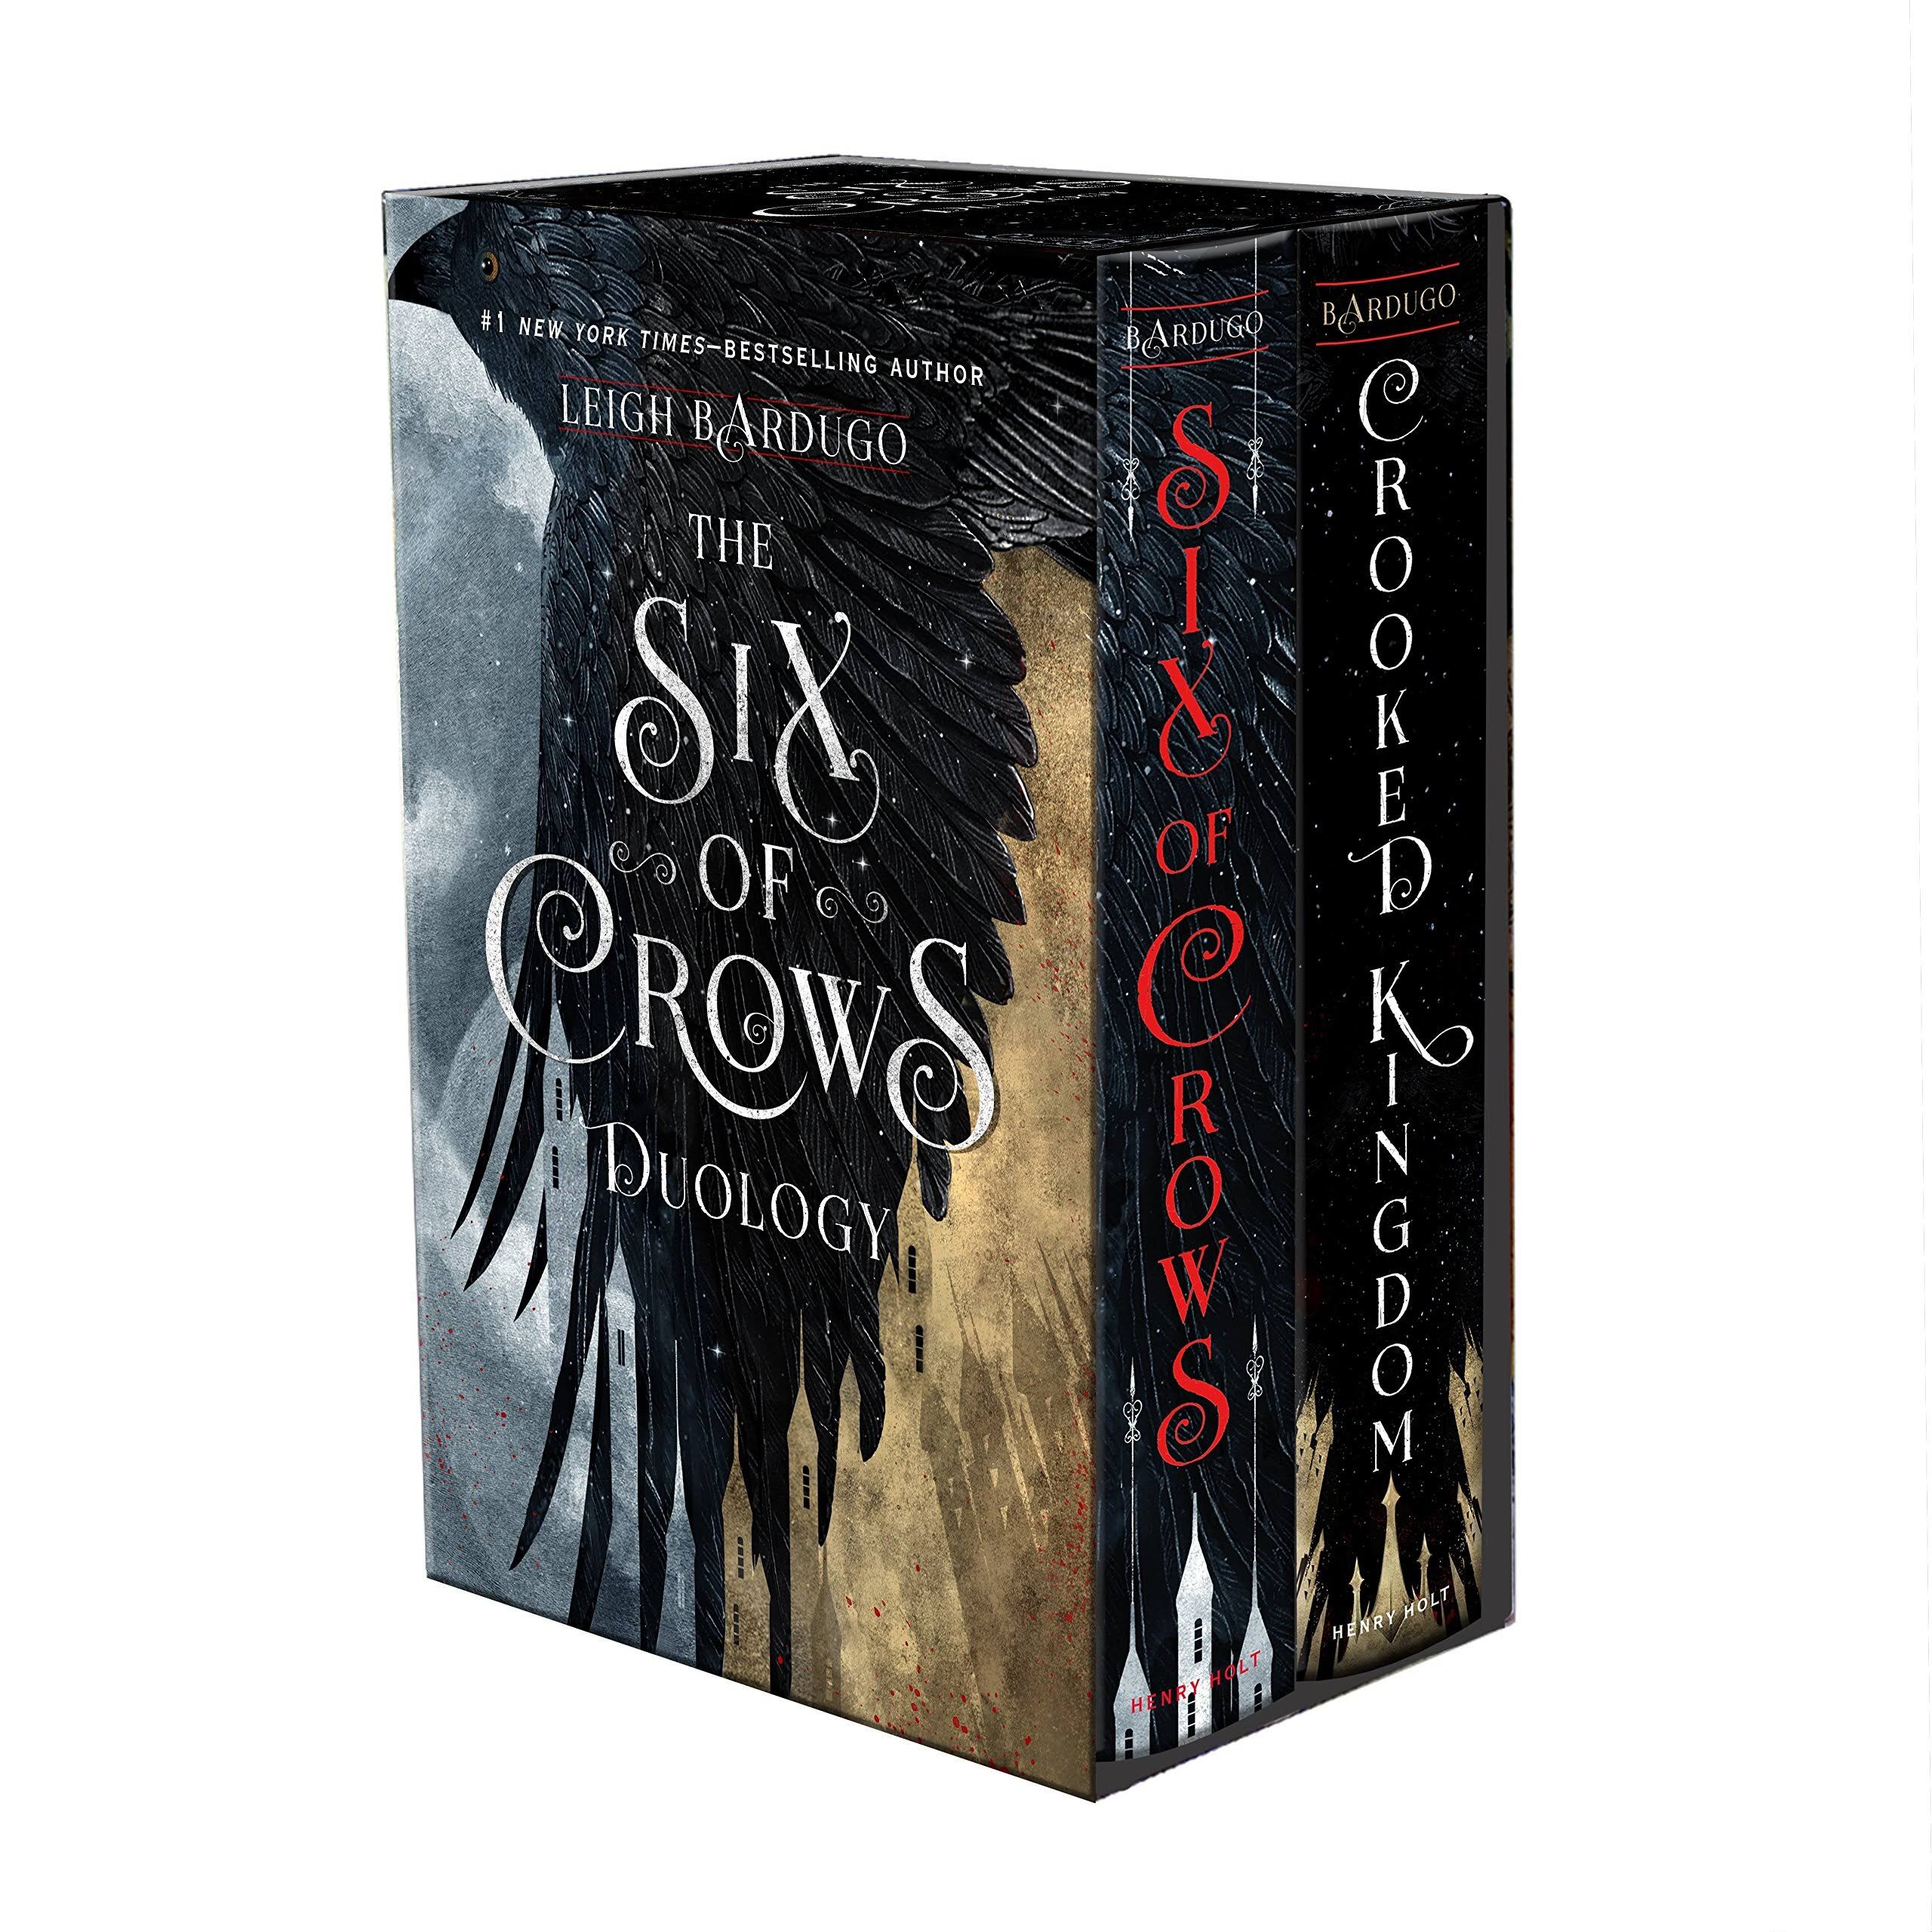 Six of Crows Boxed Set by Leigh Bardugo